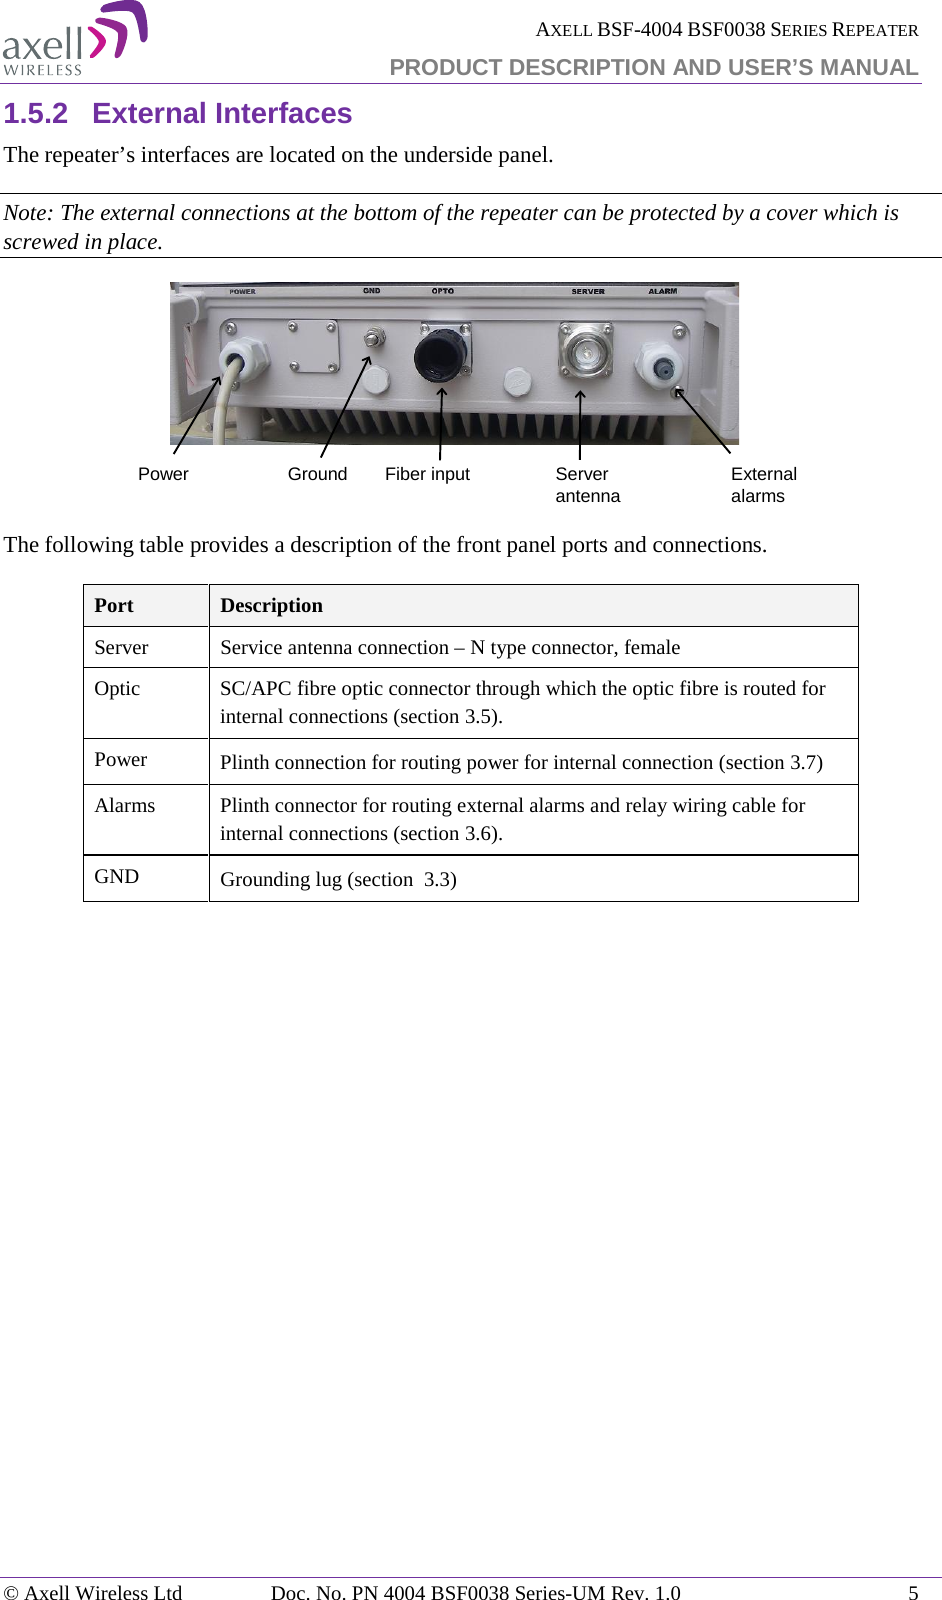  AXELL BSF-4004 BSF0038 SERIES REPEATER PRODUCT DESCRIPTION AND USER’S MANUAL  1.5.2 External Interfaces The repeater’s interfaces are located on the underside panel.   Note: The external connections at the bottom of the repeater can be protected by a cover which is screwed in place.  The following table provides a description of the front panel ports and connections.  Port Description Server Service antenna connection – N type connector, female Optic SC/APC fibre optic connector through which the optic fibre is routed for internal connections (section  3.5). Power Plinth connection for routing power for internal connection (section  3.7) Alarms Plinth connector for routing external alarms and relay wiring cable for internal connections (section  3.6). GND Grounding lug (section   3.3)    Power Fiber inputGround Server antenna External alarms© Axell Wireless Ltd Doc. No. PN 4004 BSF0038 Series-UM Rev. 1.0  5 